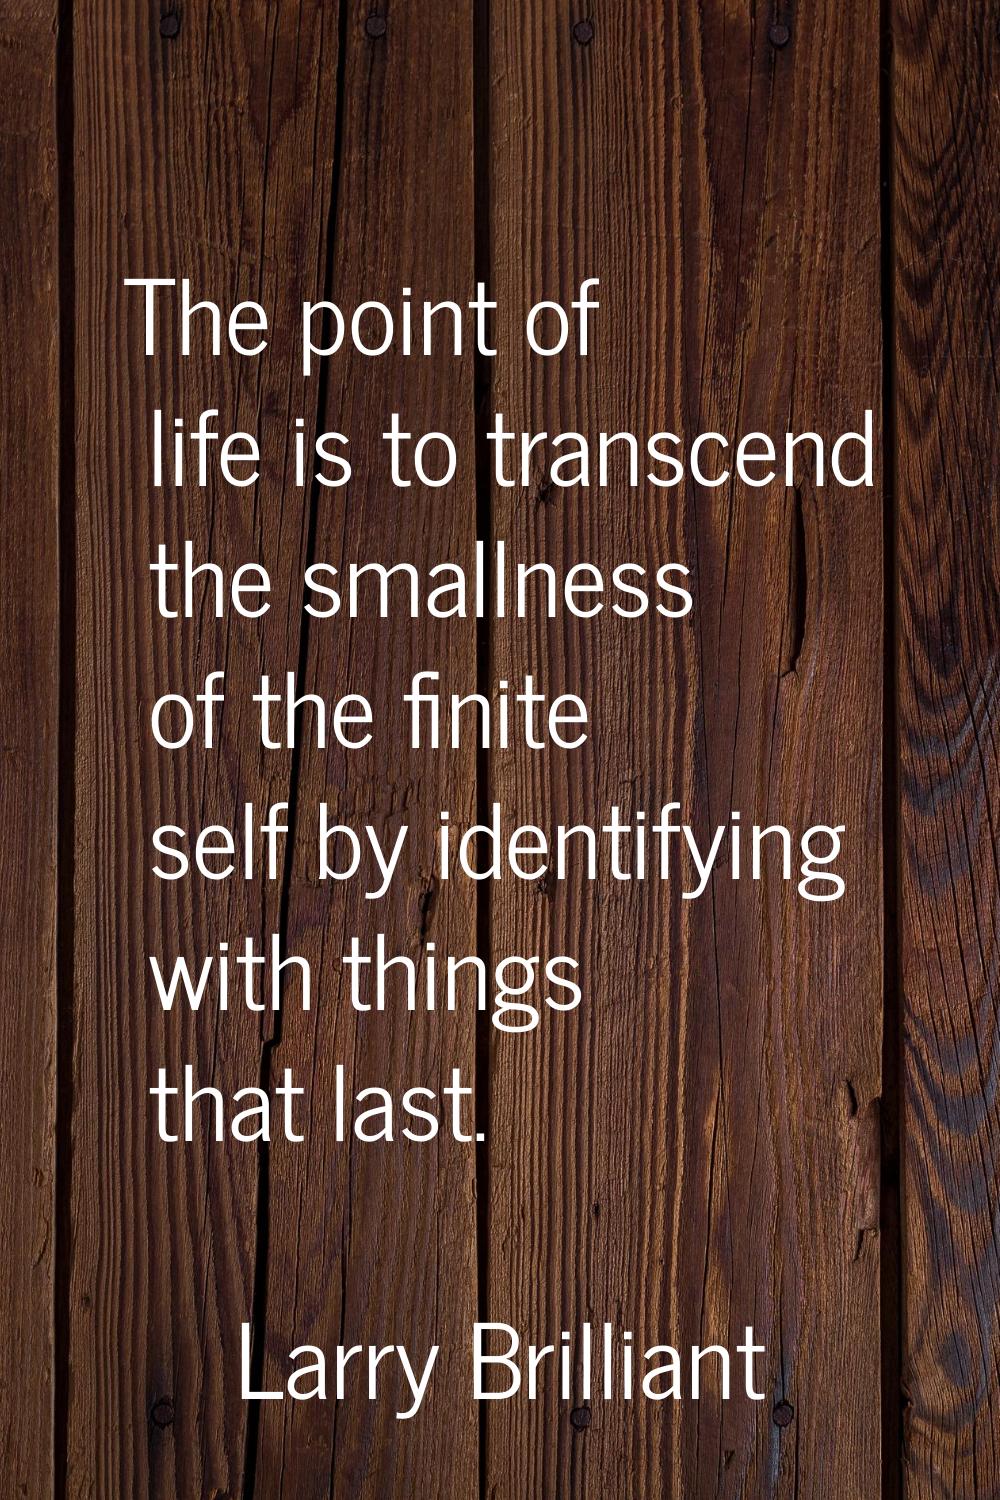 The point of life is to transcend the smallness of the finite self by identifying with things that 